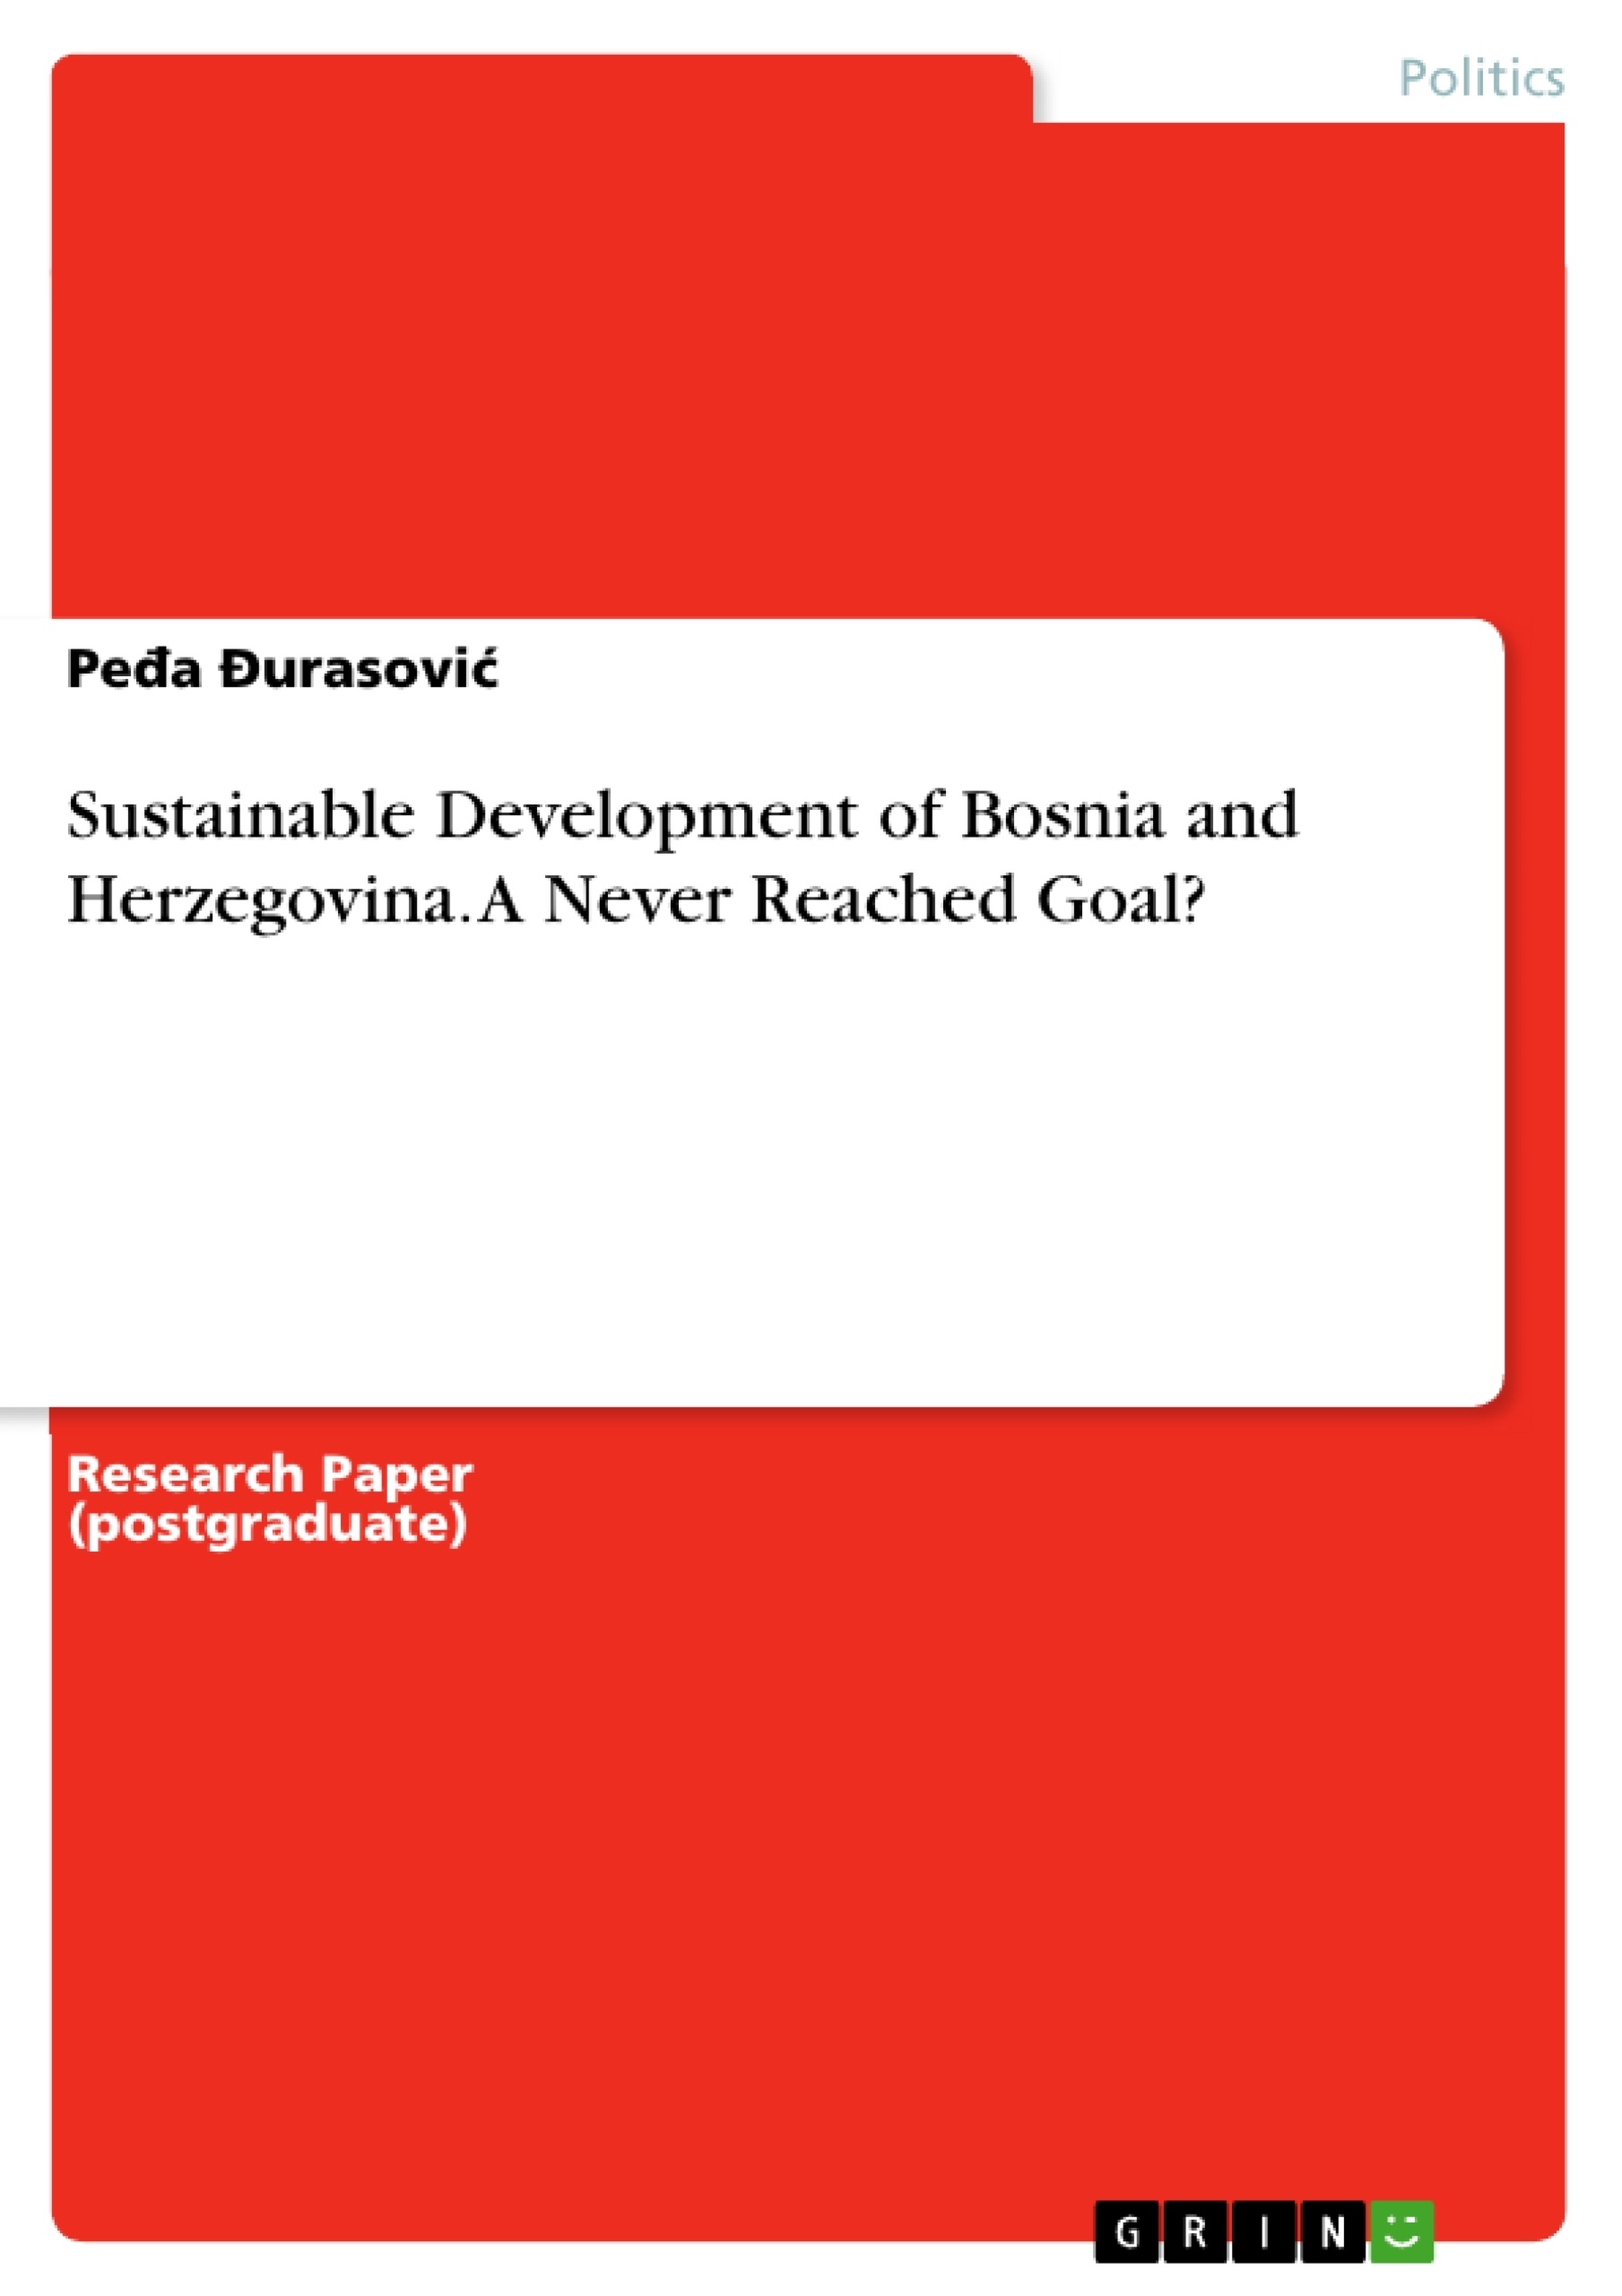 Title: Sustainable Development of Bosnia and Herzegovina. A Never Reached Goal?